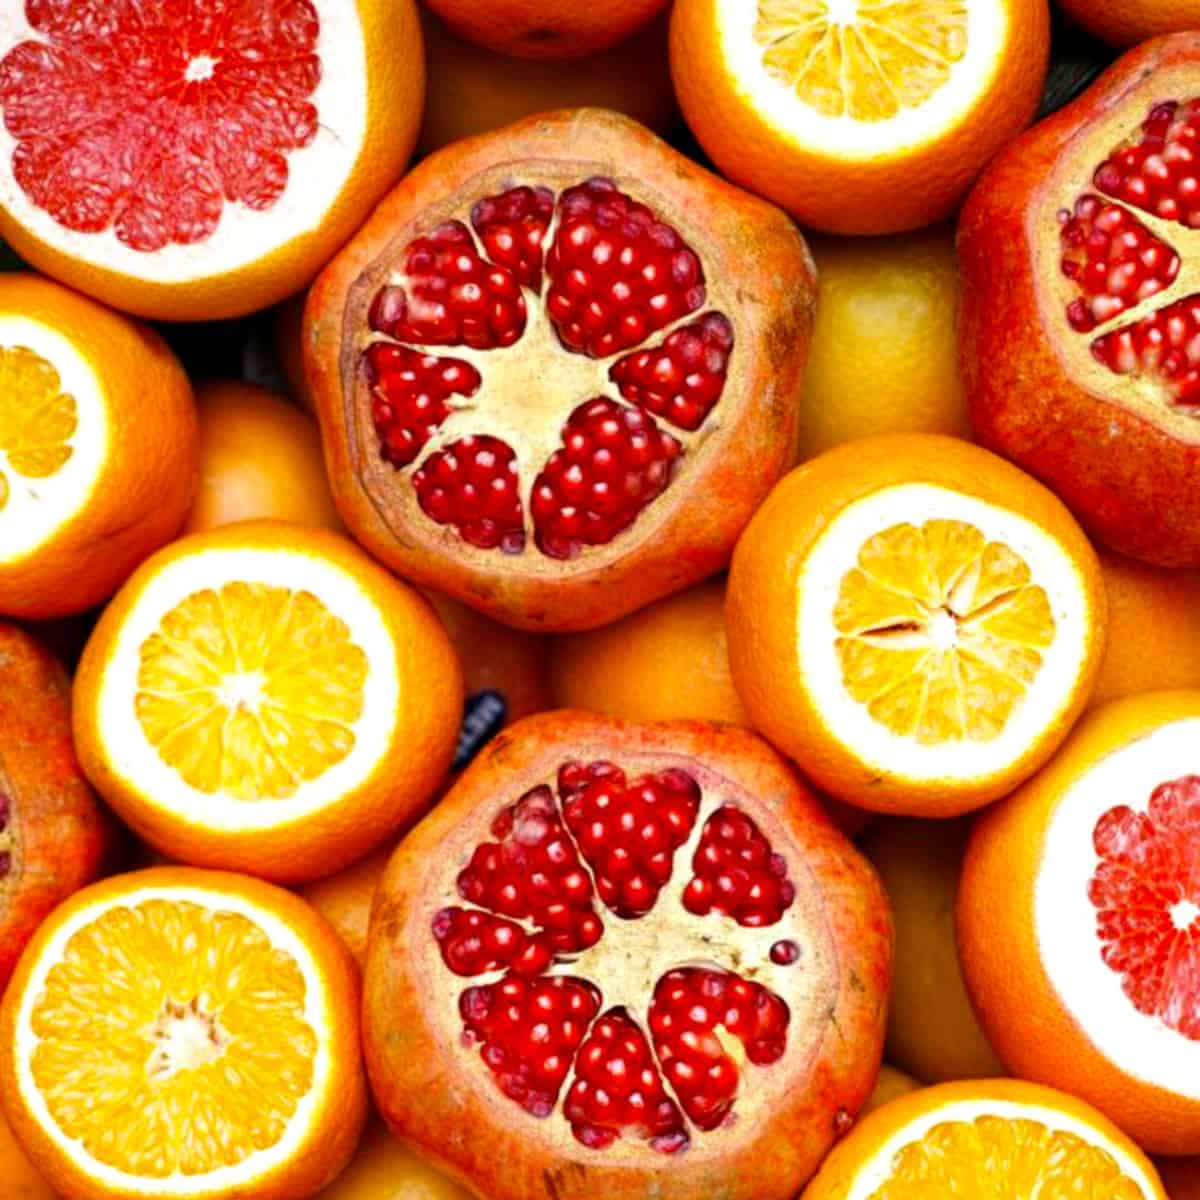 citrus fruits cut open to see the insides